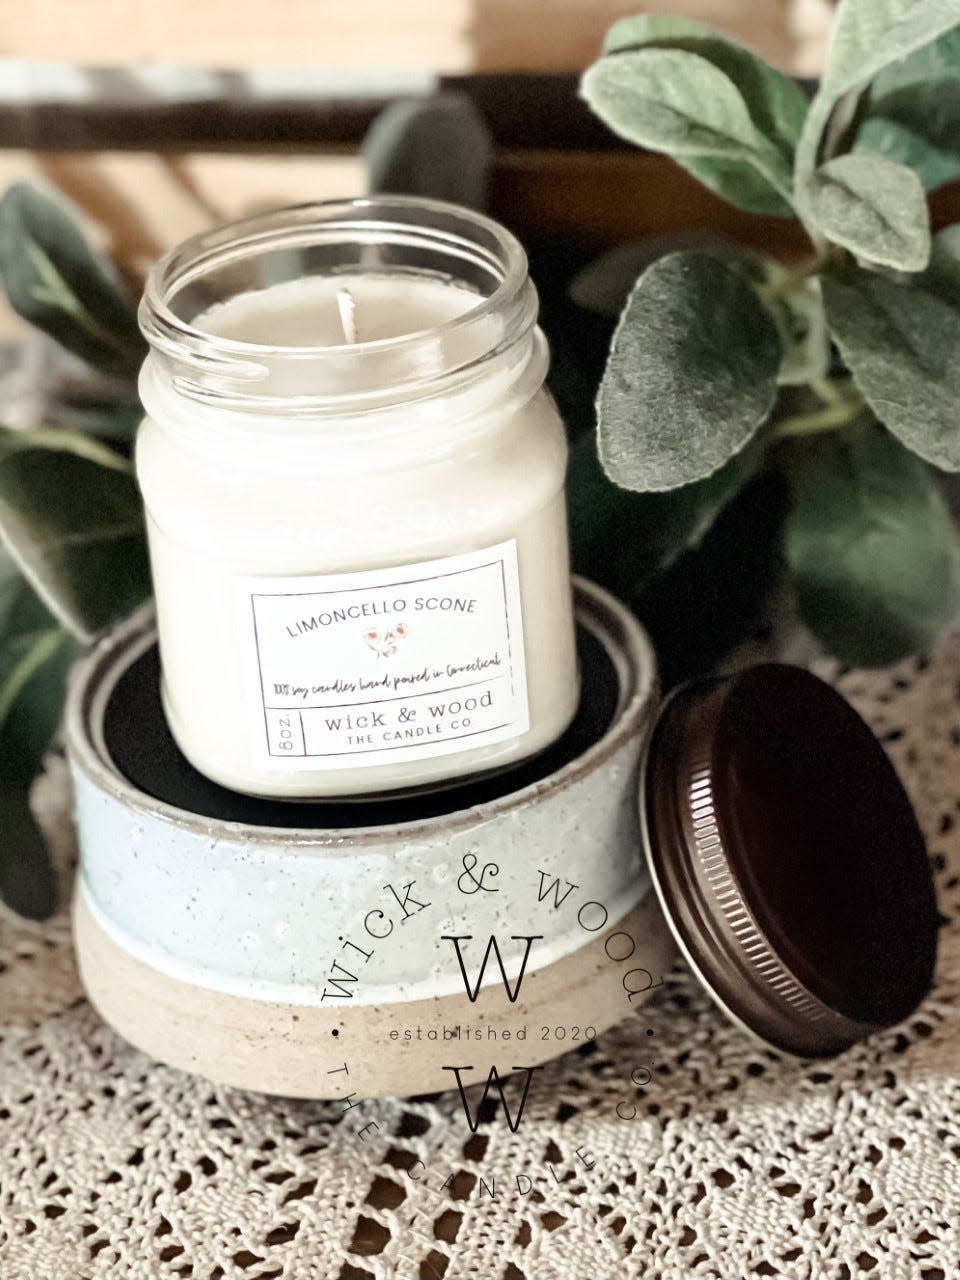 Wick & Wood: The Candle Co.